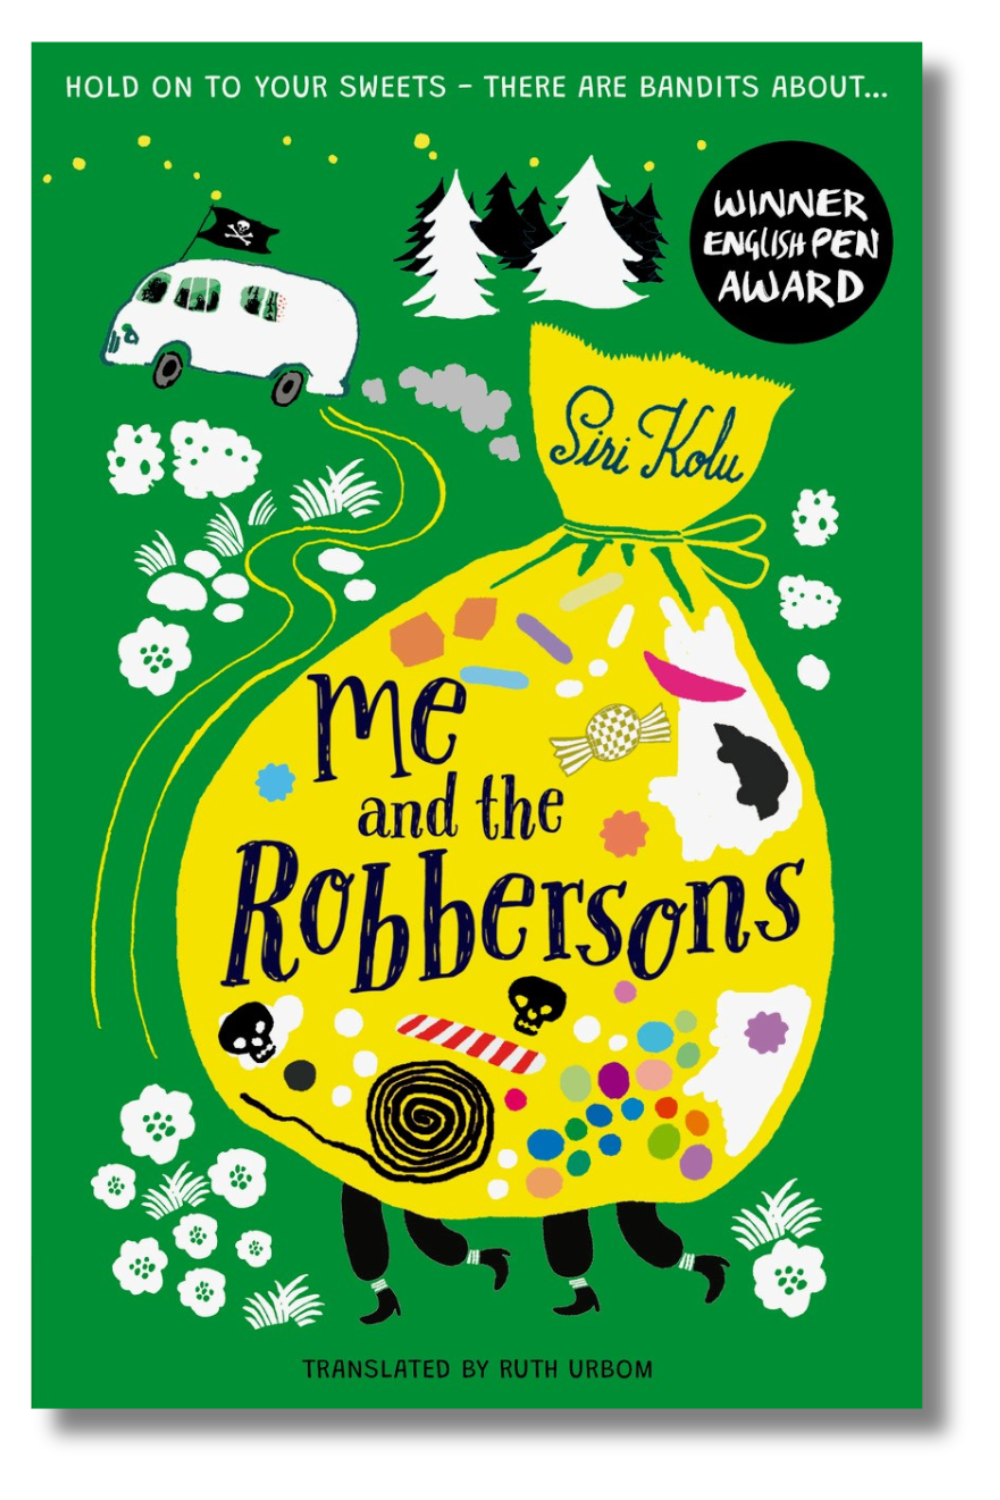 The cover of "Me and the Robbersons" by Siri Kolu, tr. by Ruth Urbom